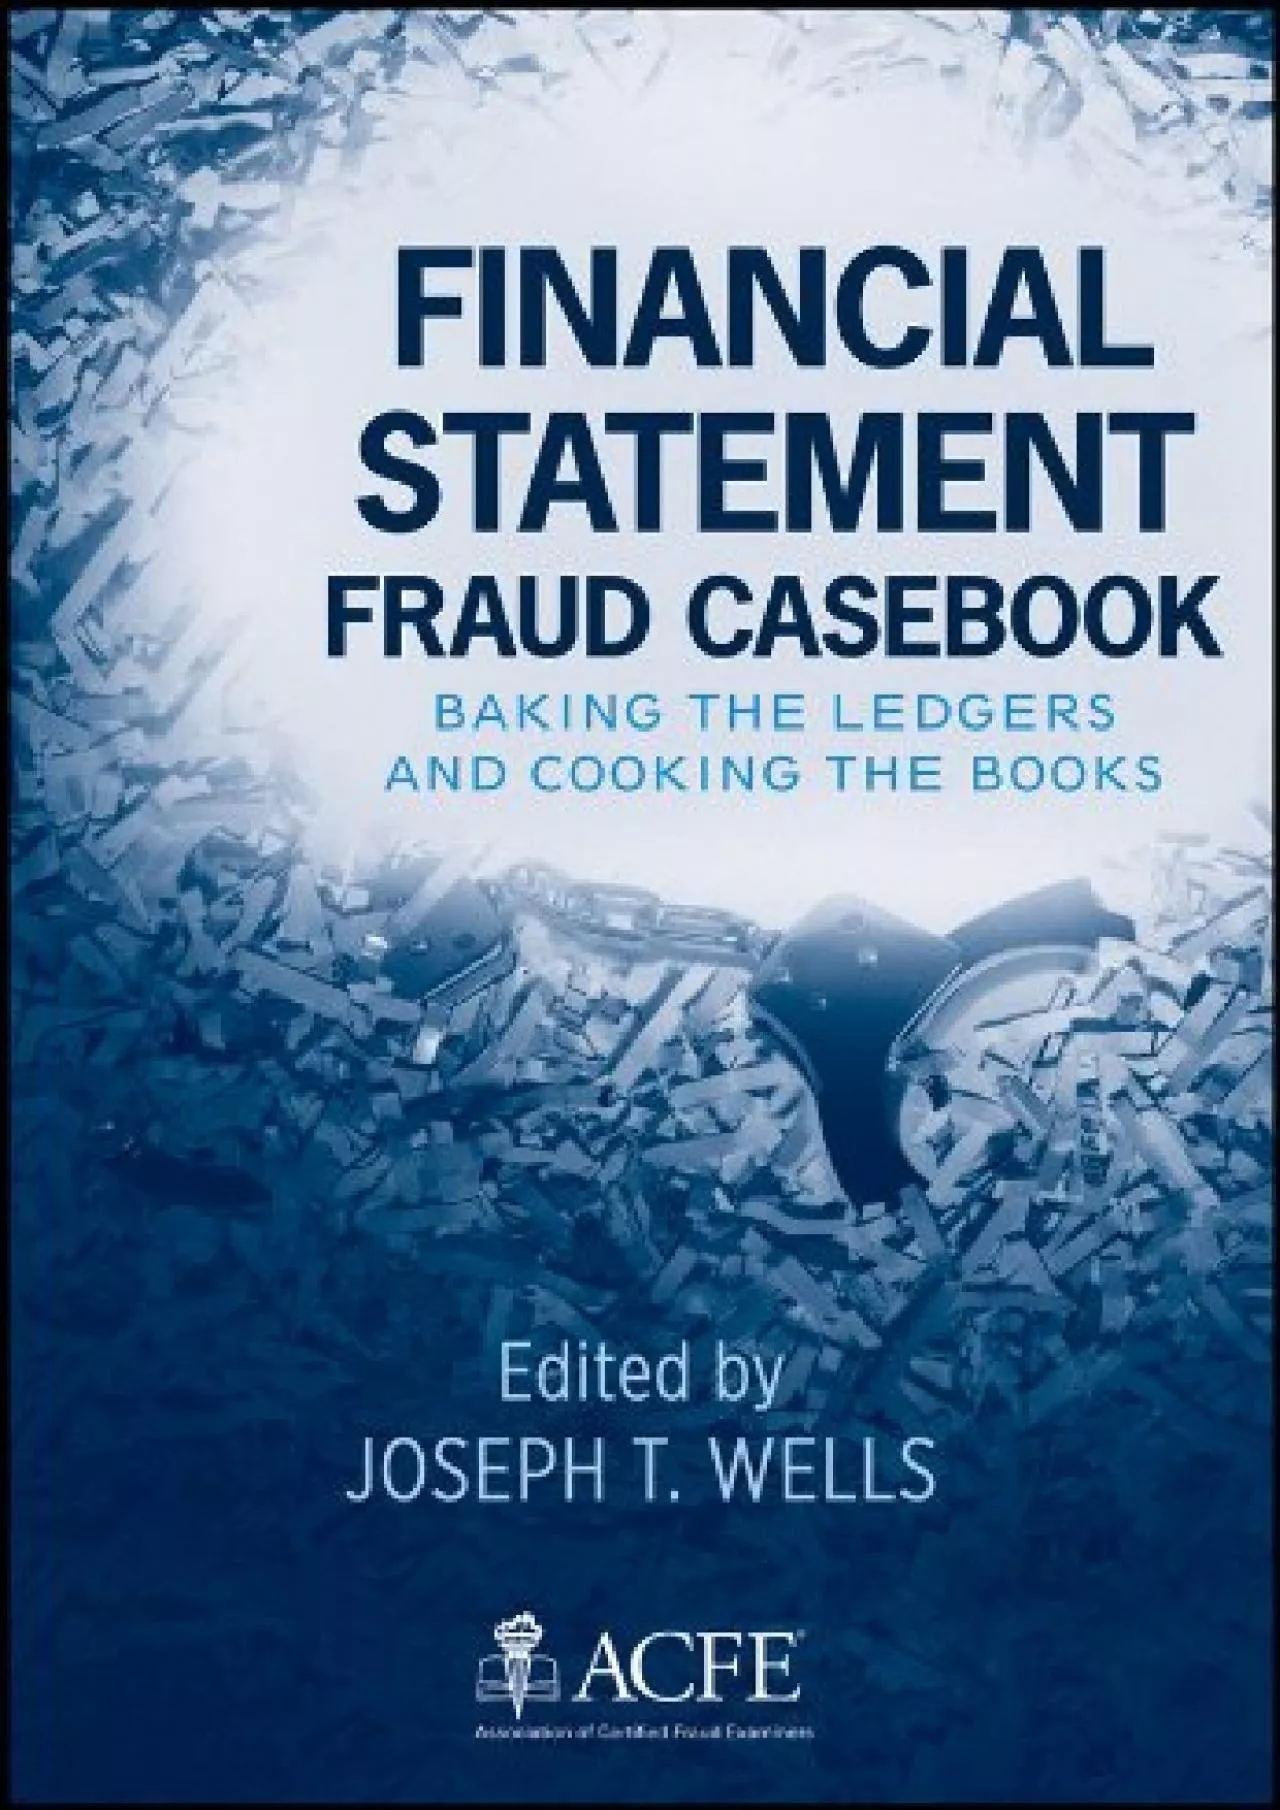 (EBOOK)-Financial Statement Fraud Casebook: Baking the Ledgers and Cooking the Books